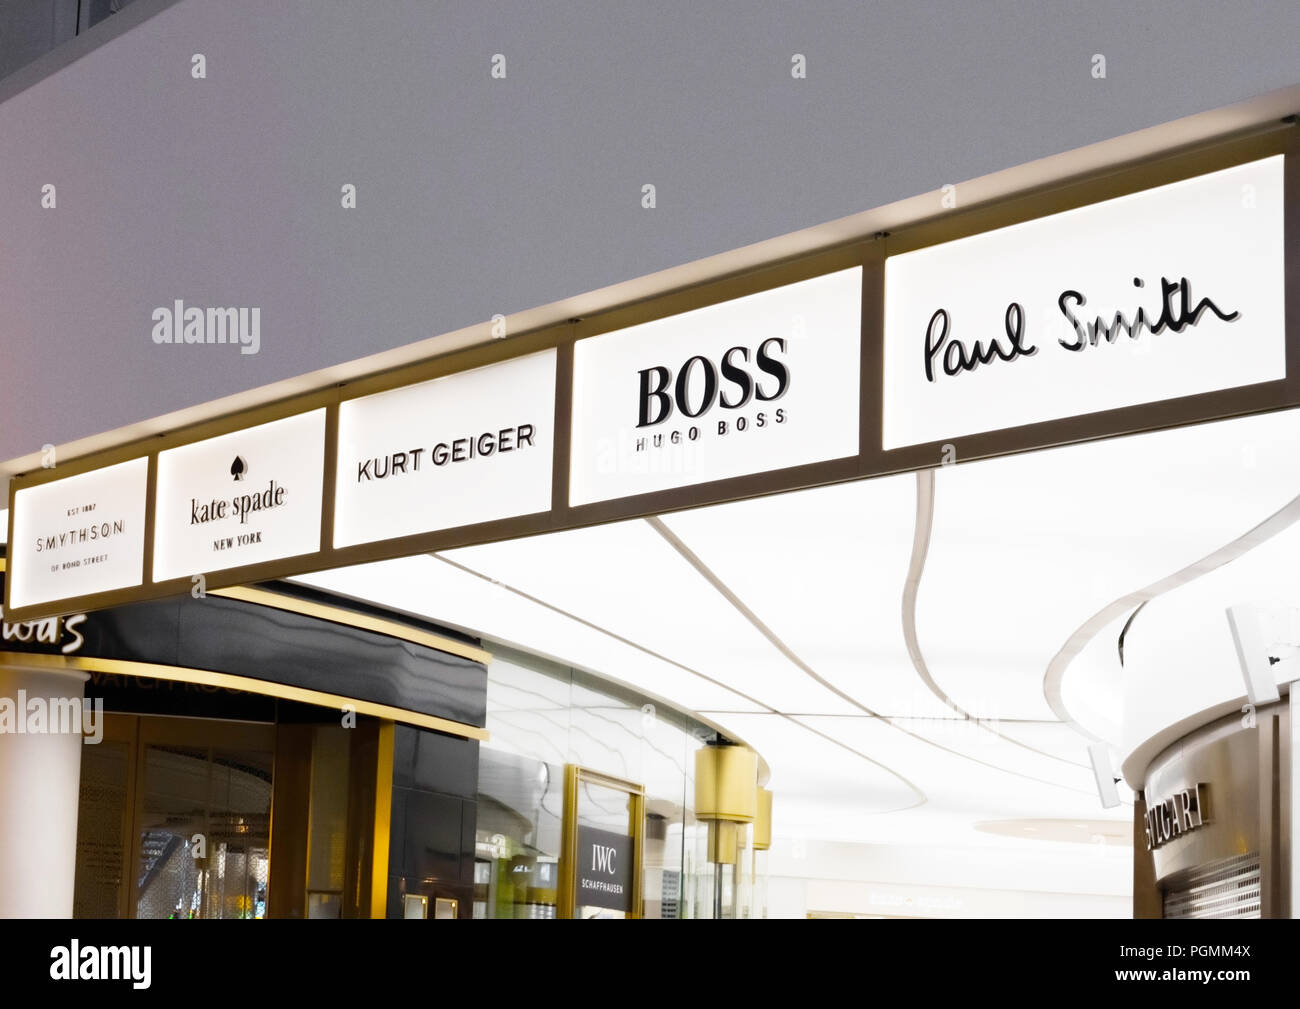 LONDON, UK - AUGUST 31, 2018: Hugo boss and Paul Smith logo on display in  luxury fashion store Stock Photo - Alamy